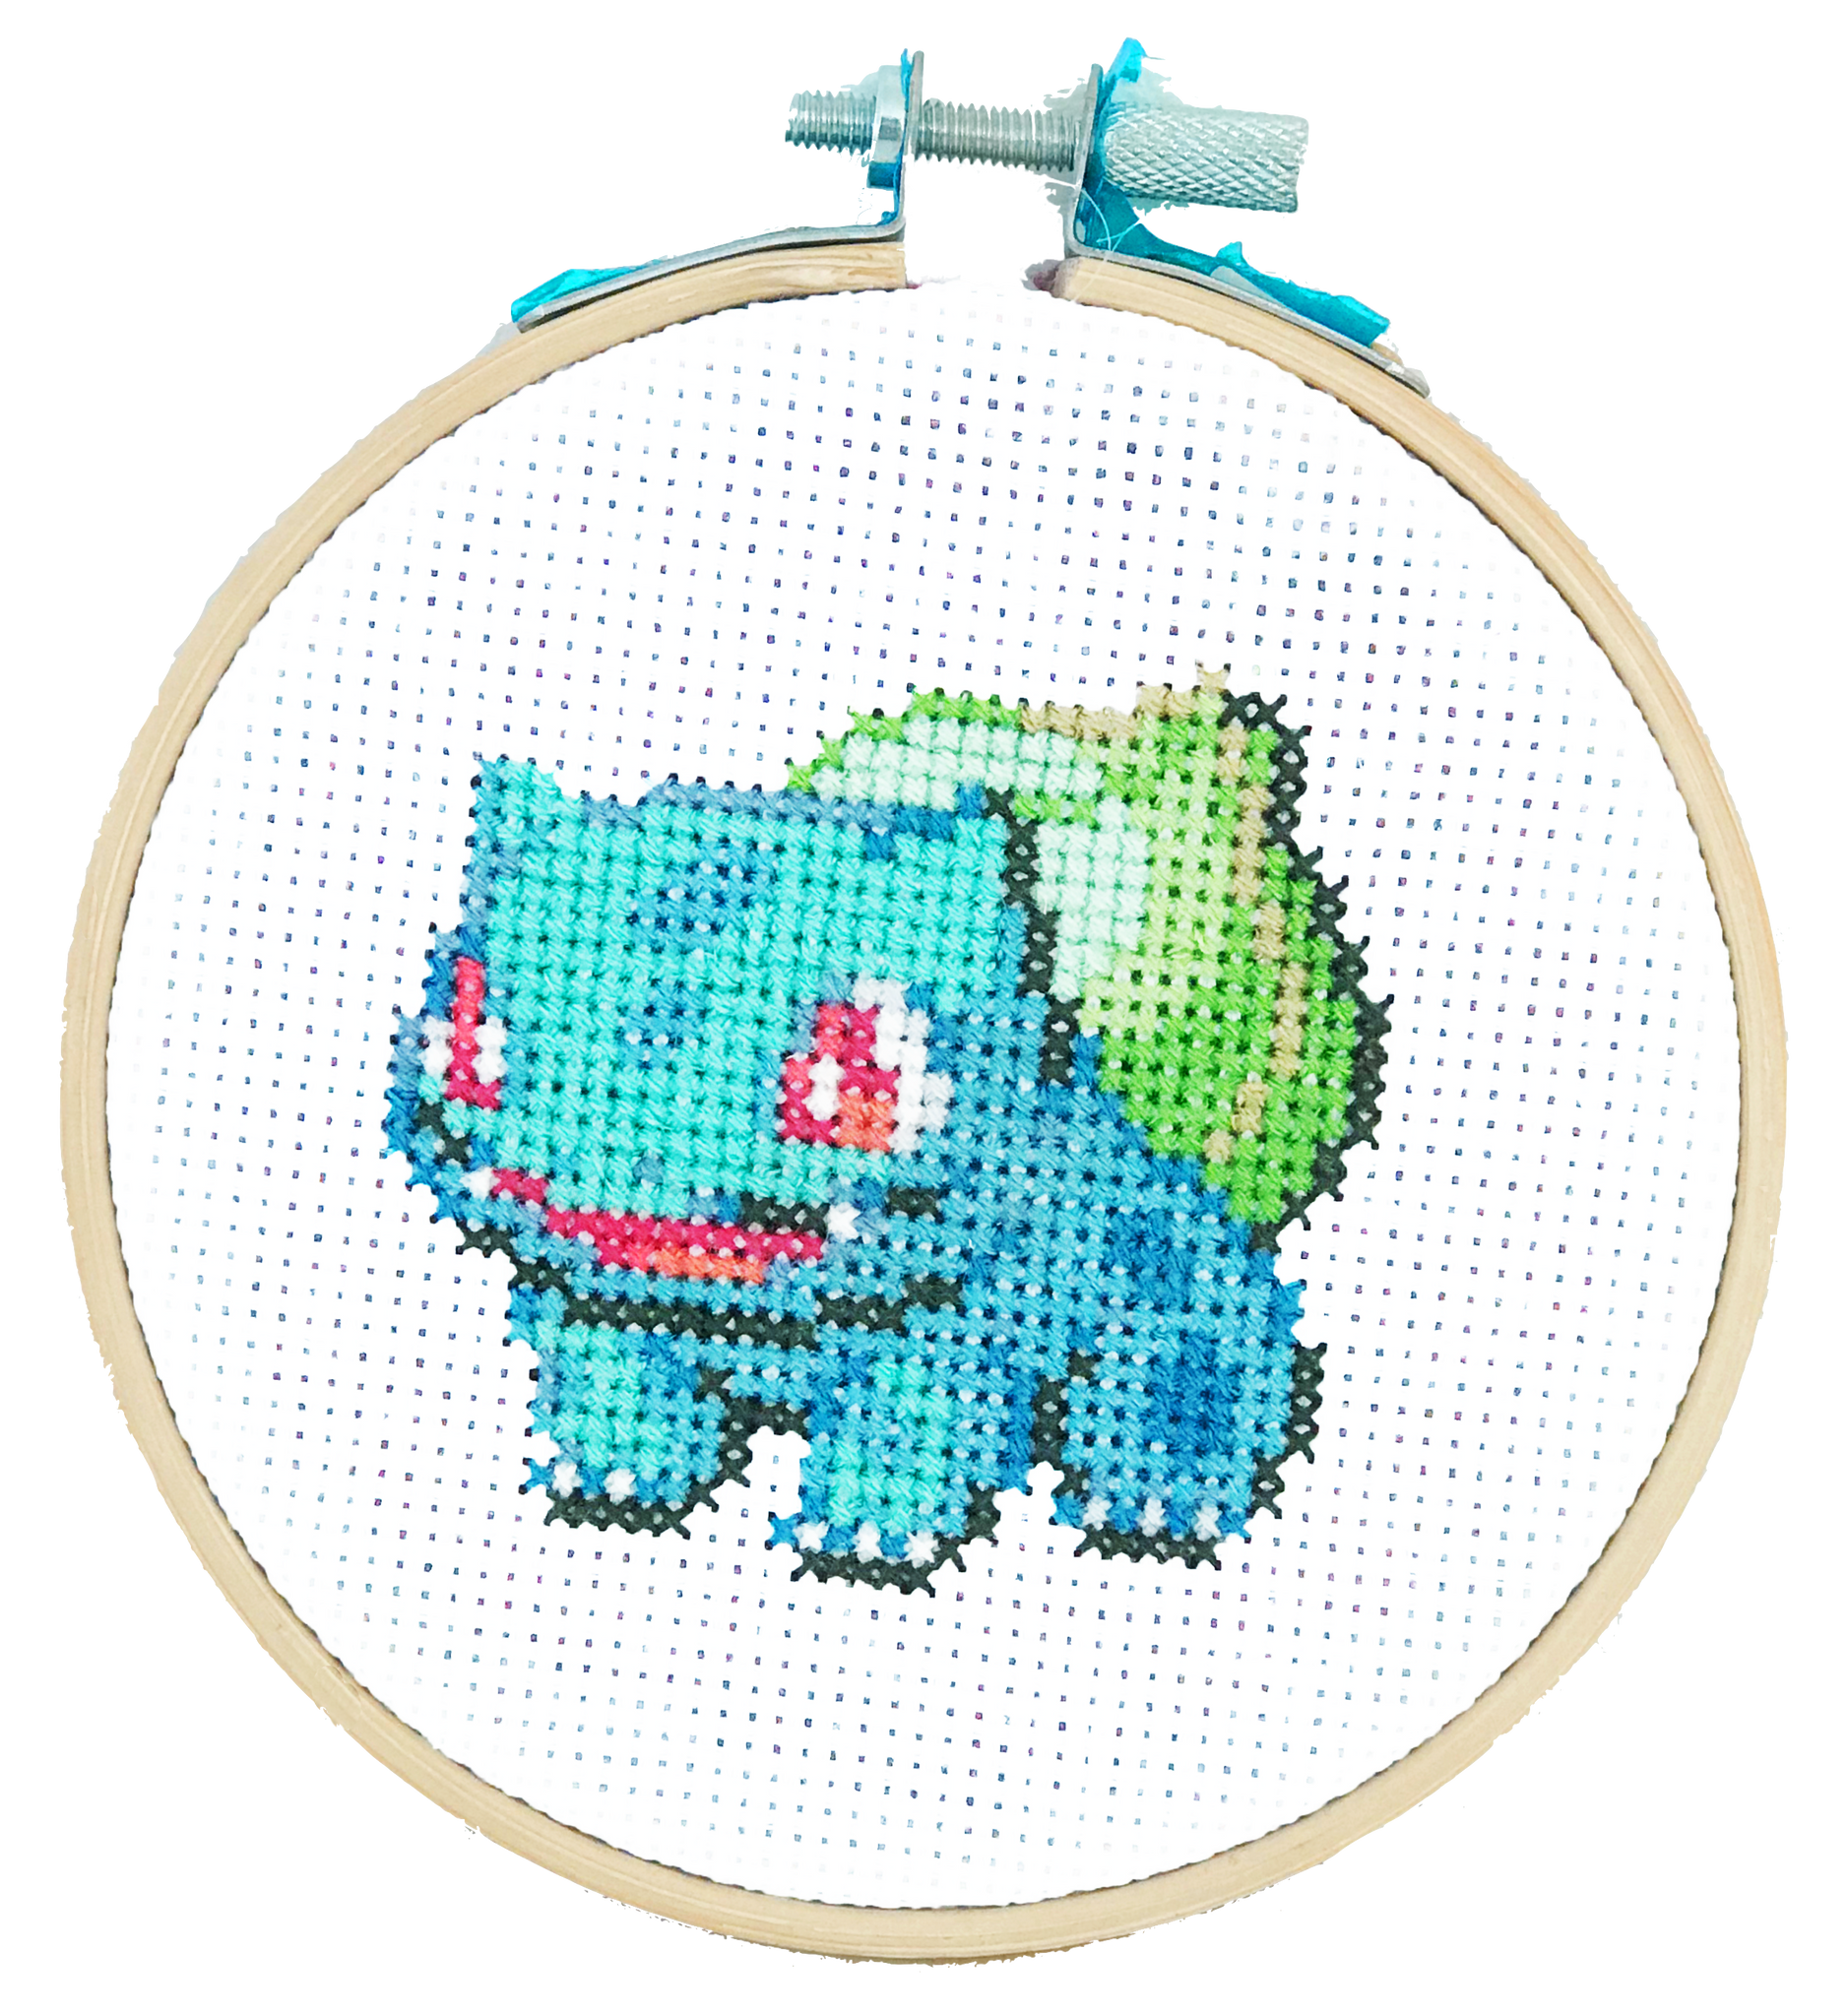 Bulbasaur Pokemon Cross Stitch Kit DIY Craft Kit The Cloud Factory TheCloudFactory Embroidery Kit Aida Cloth, Embroidery Floss, Embroidery Needle, String, Felt, Embroidery Hoop